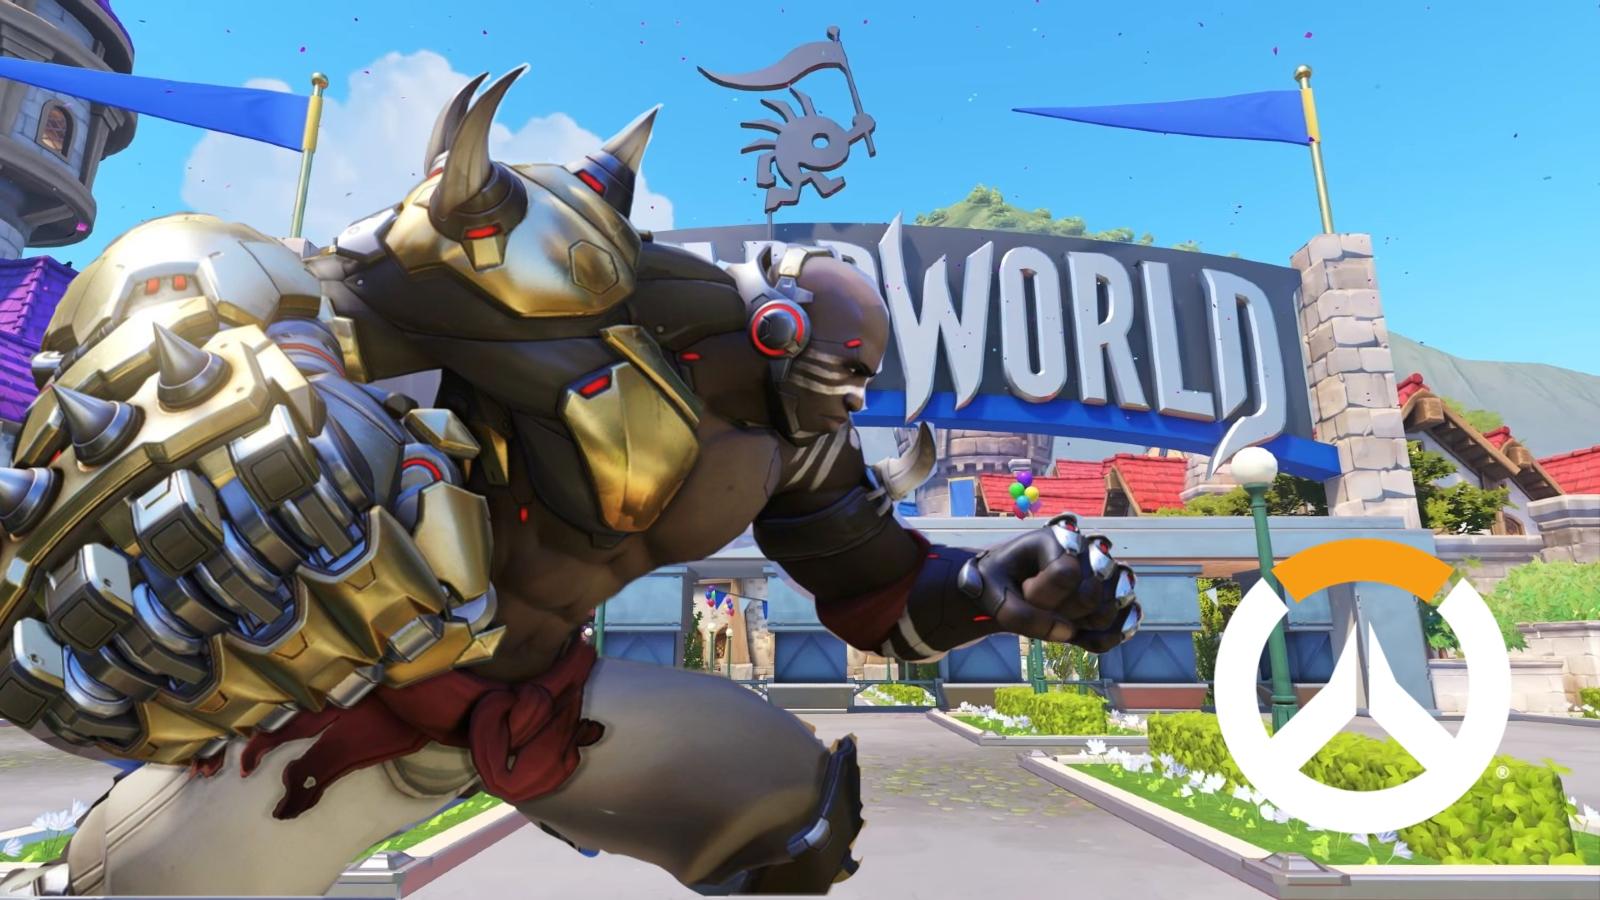 Doomfist in front of the Blizzard World sign